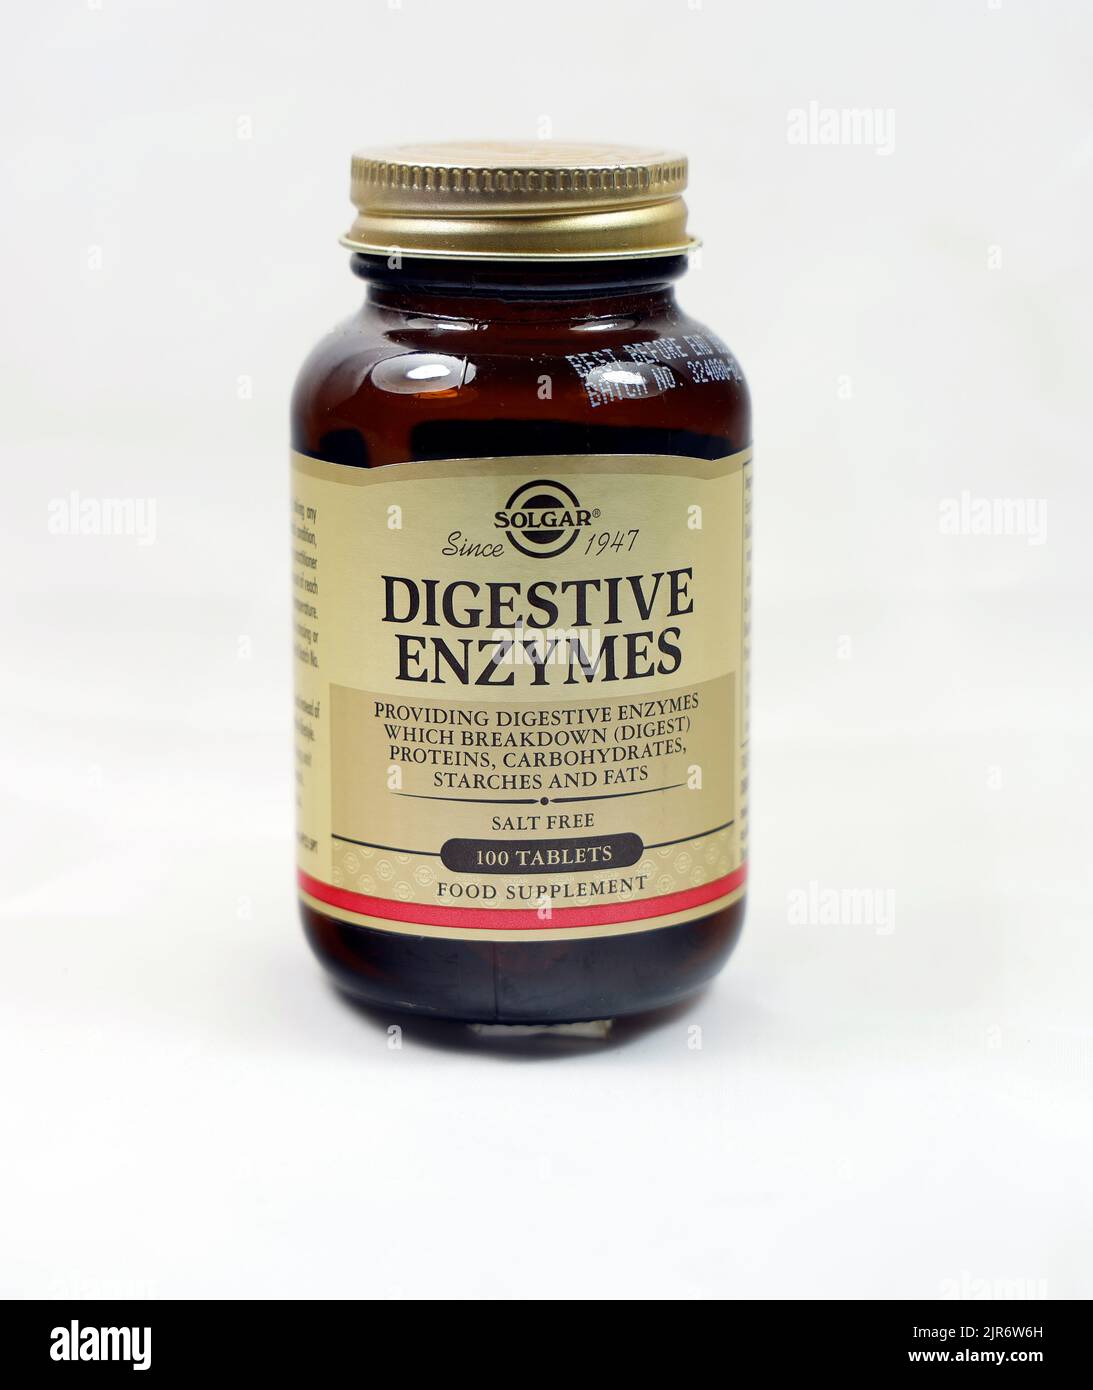 Digestive enzymes tablets. Solgar. Brown, glass bottle with gold coloured label.. August 2022 Stock Photo